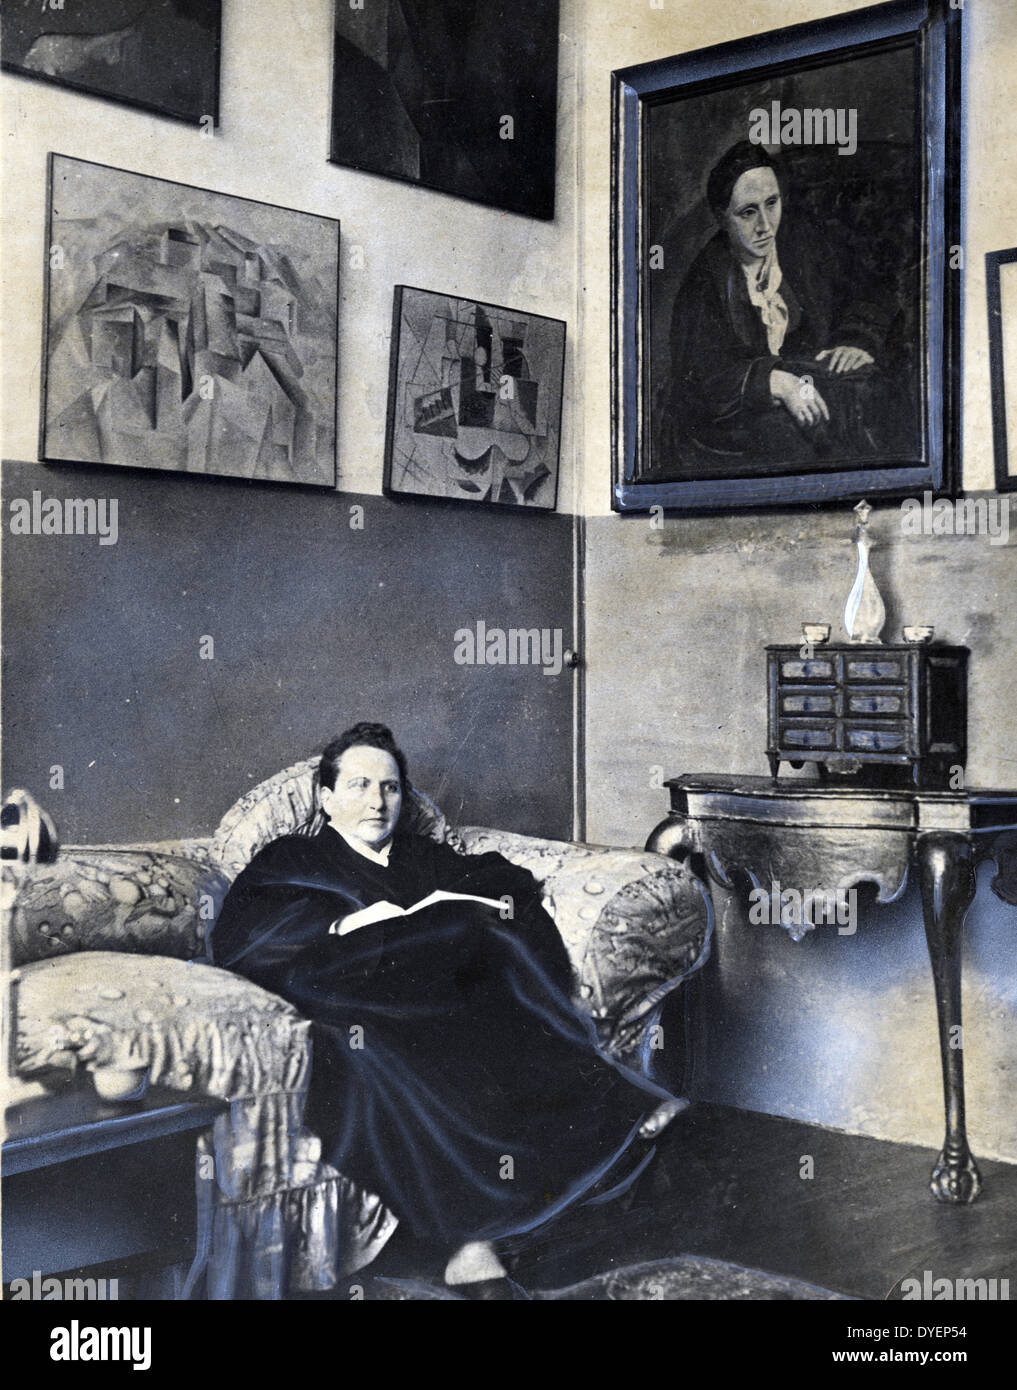 Gertrude Stein sitting on a sofa in her Paris studio, with a portrait of her by Pablo Picasso, and other modern art paintings hanging on the wall behind her 1930 Stock Photo